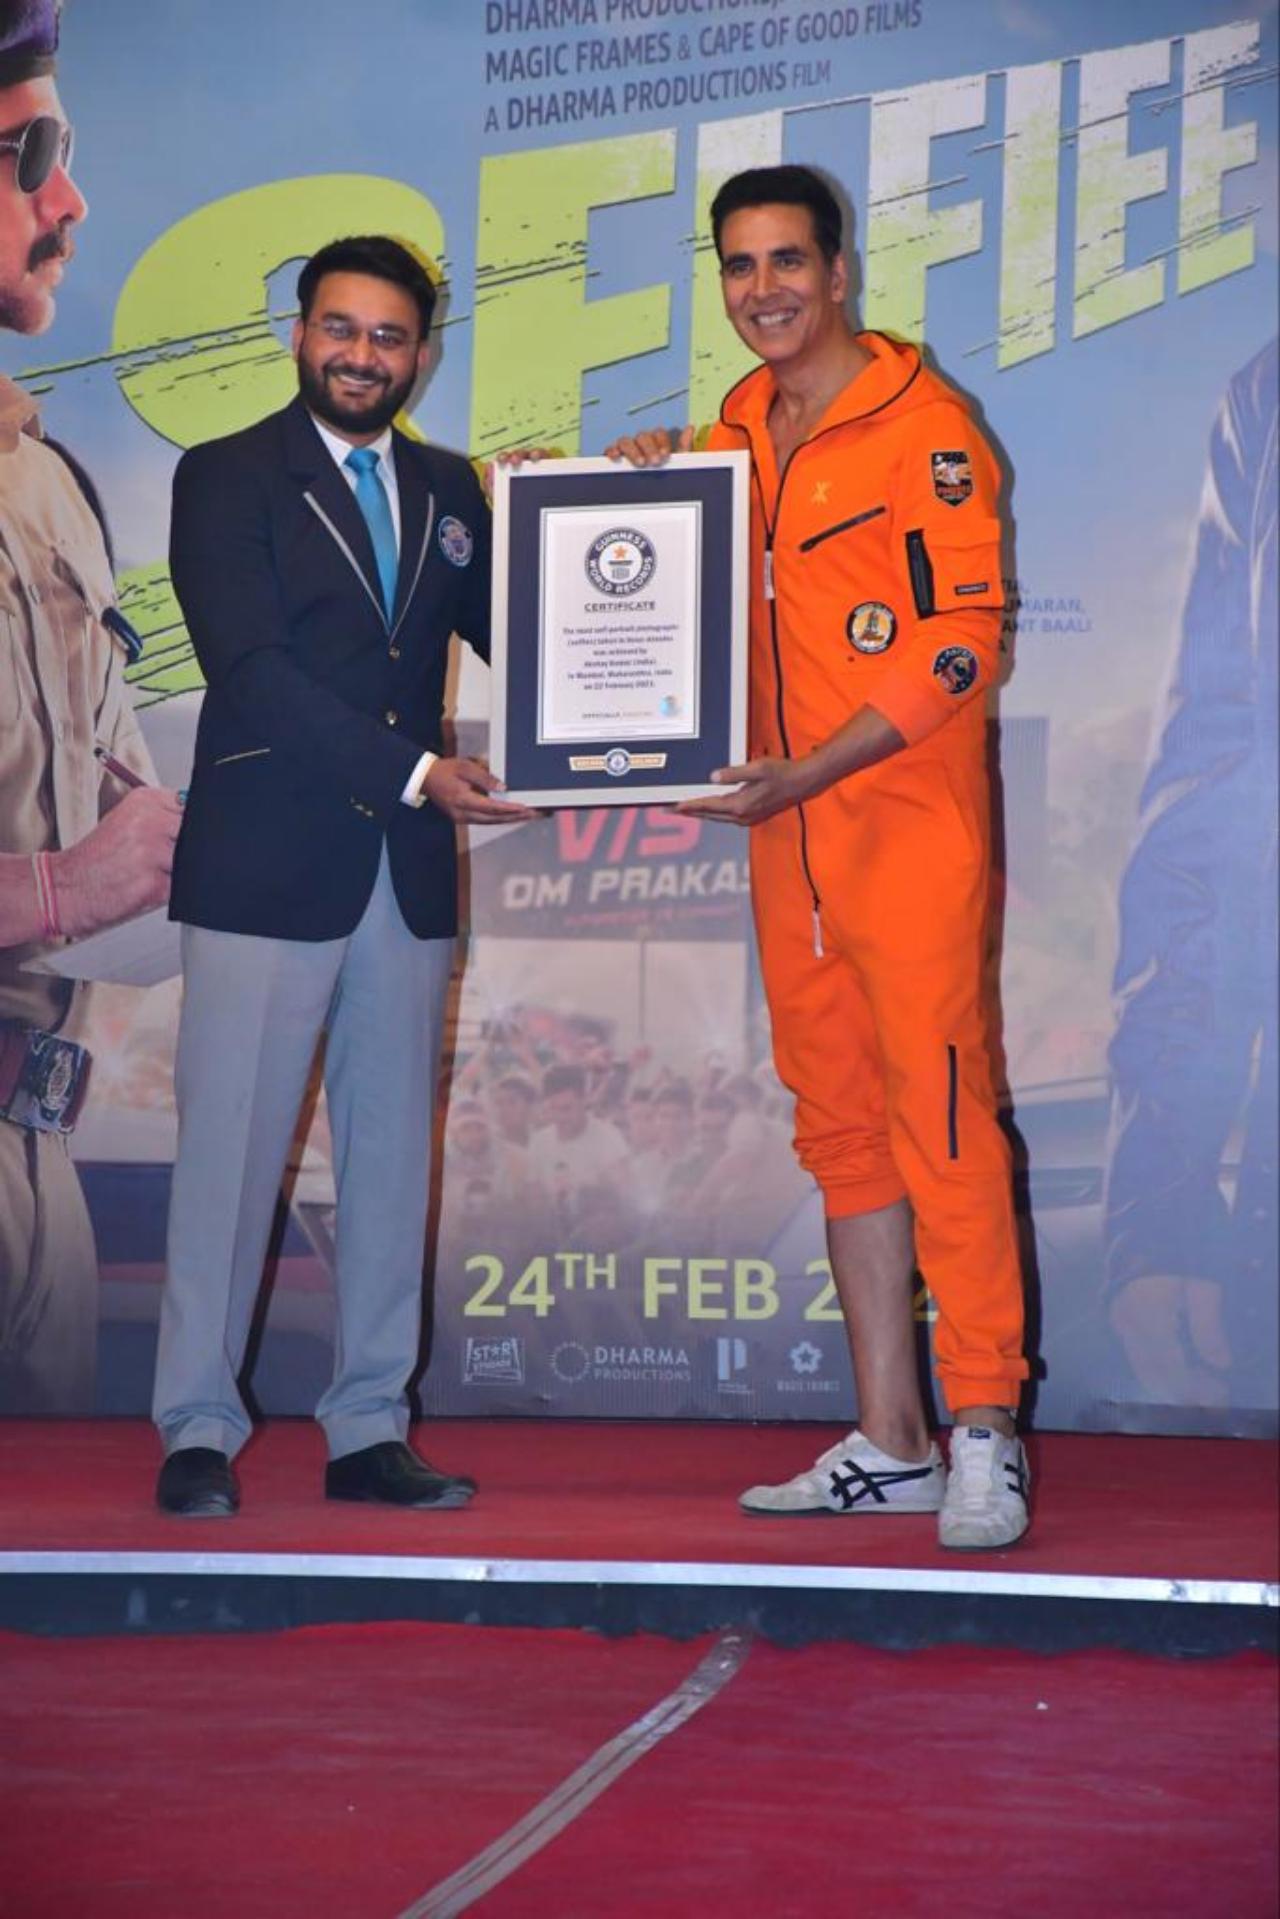 Akshay Kumar broke the Guinness World Records title on February 22 for the Most self-portrait photographs (selfies) taken in three minutes at a meet and greet with fans scheduled in Mumbai, Maharashtra for the promotion of his upcoming movie 'Selfiee' releasing on February 24, 2023. Kumar, known for his disruptive stunts and distinctive records, is now the Guinness World Records title holder for this special feat with 184 selfies. 